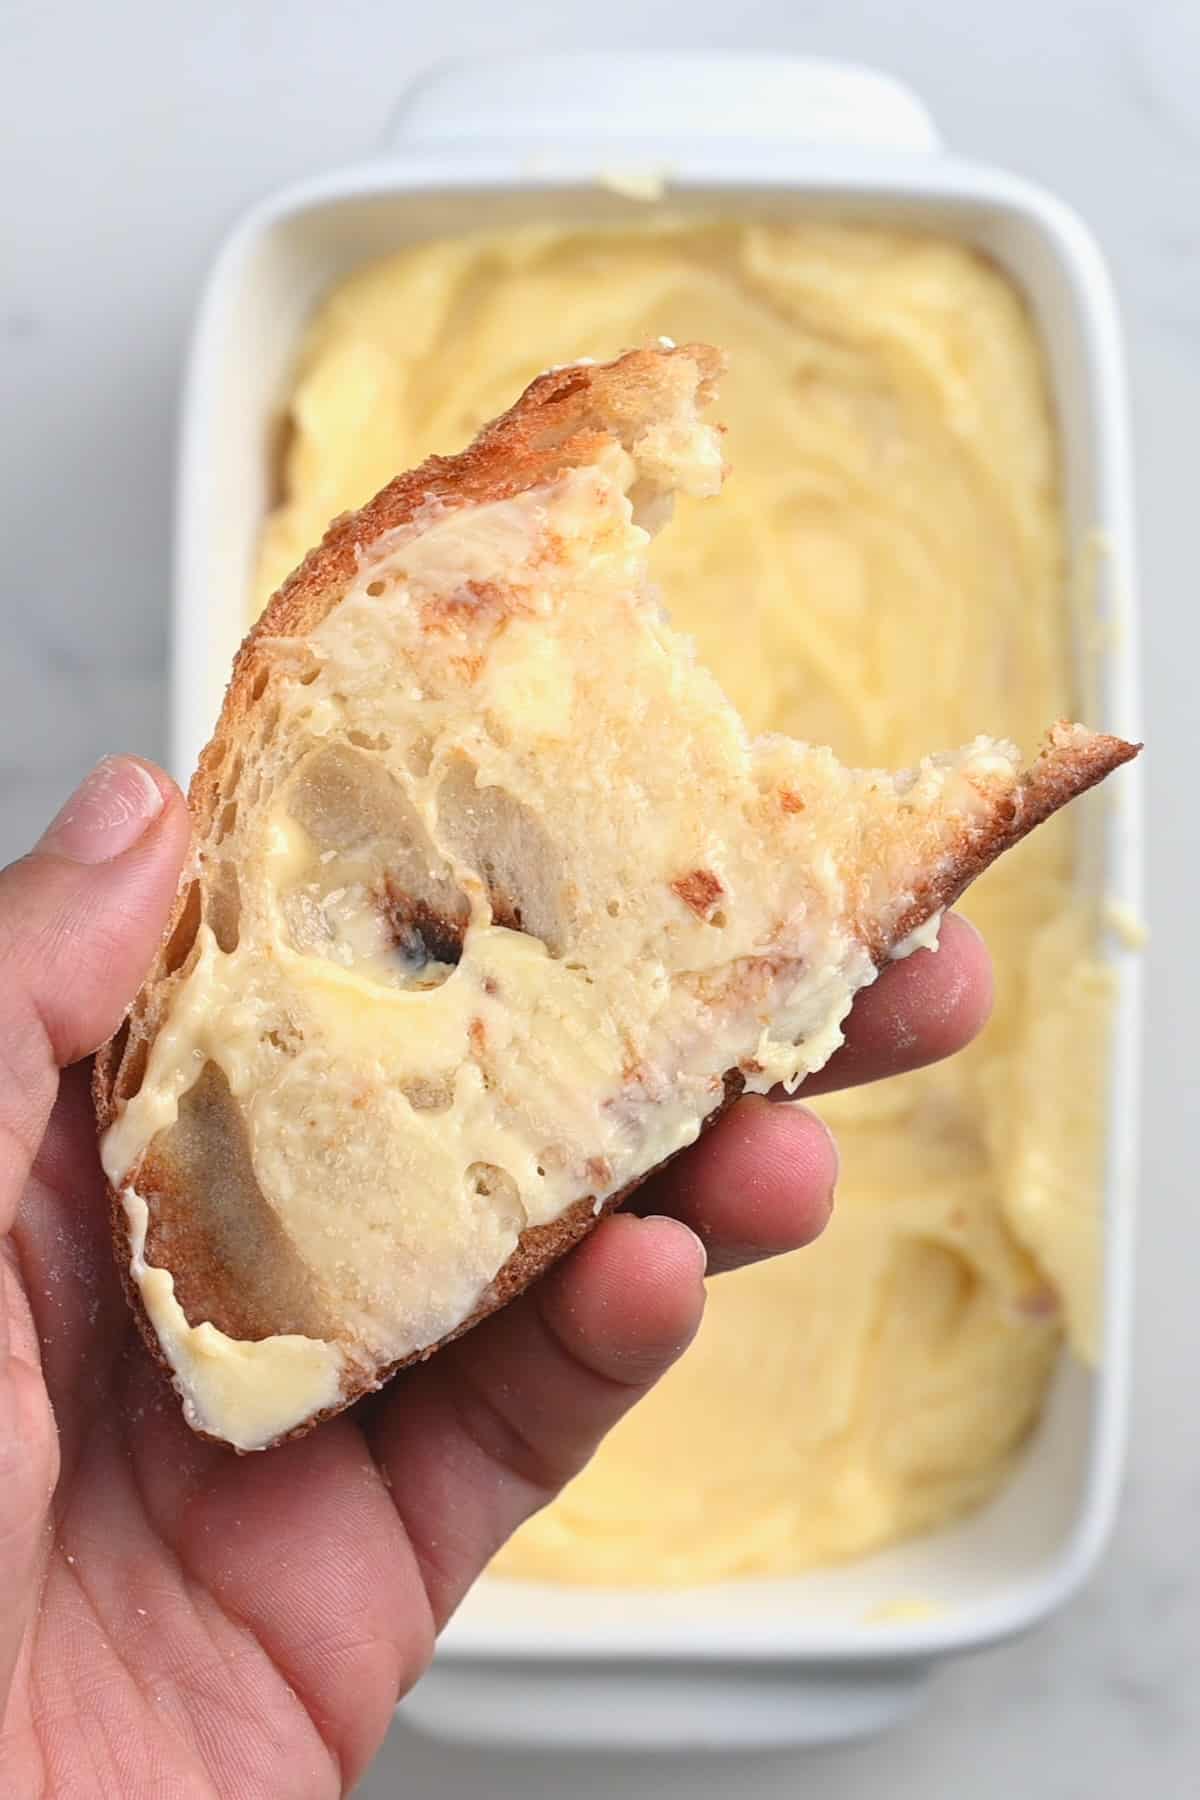 A slice of toast with roasted garlic butter